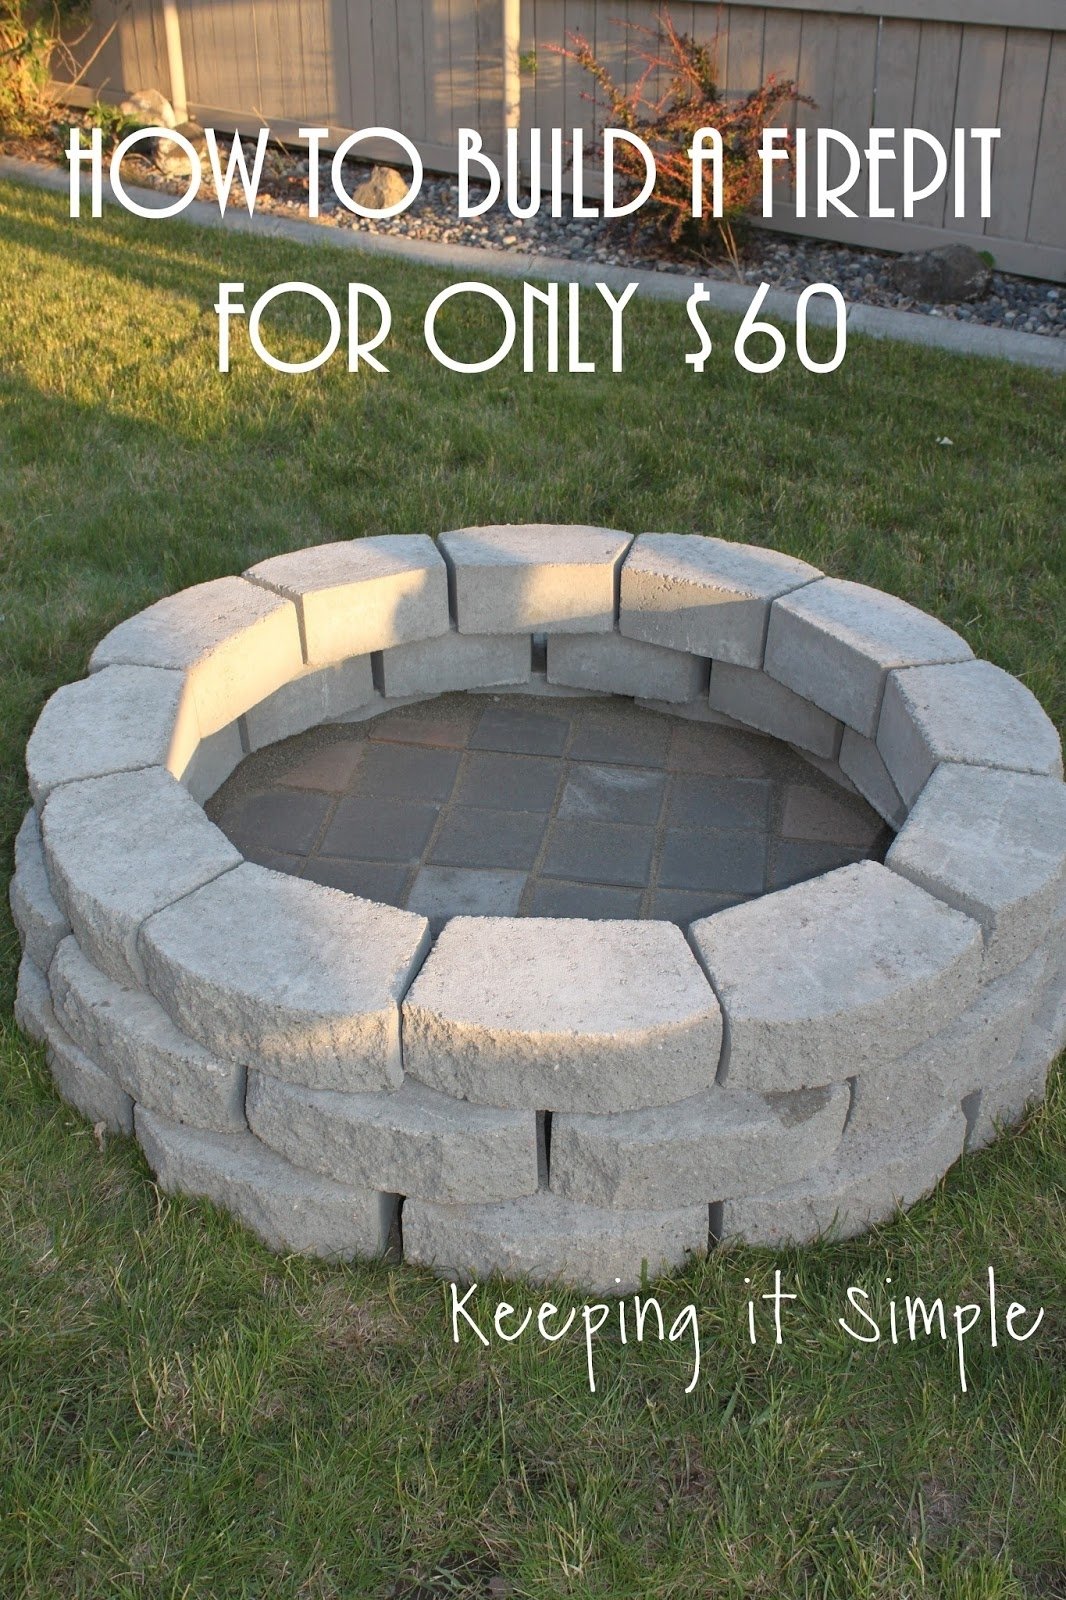 10 Spectacular Do It Yourself Fire Pit Ideas how to build a diy fire pit for only 60 e280a2 keeping it simple 2023